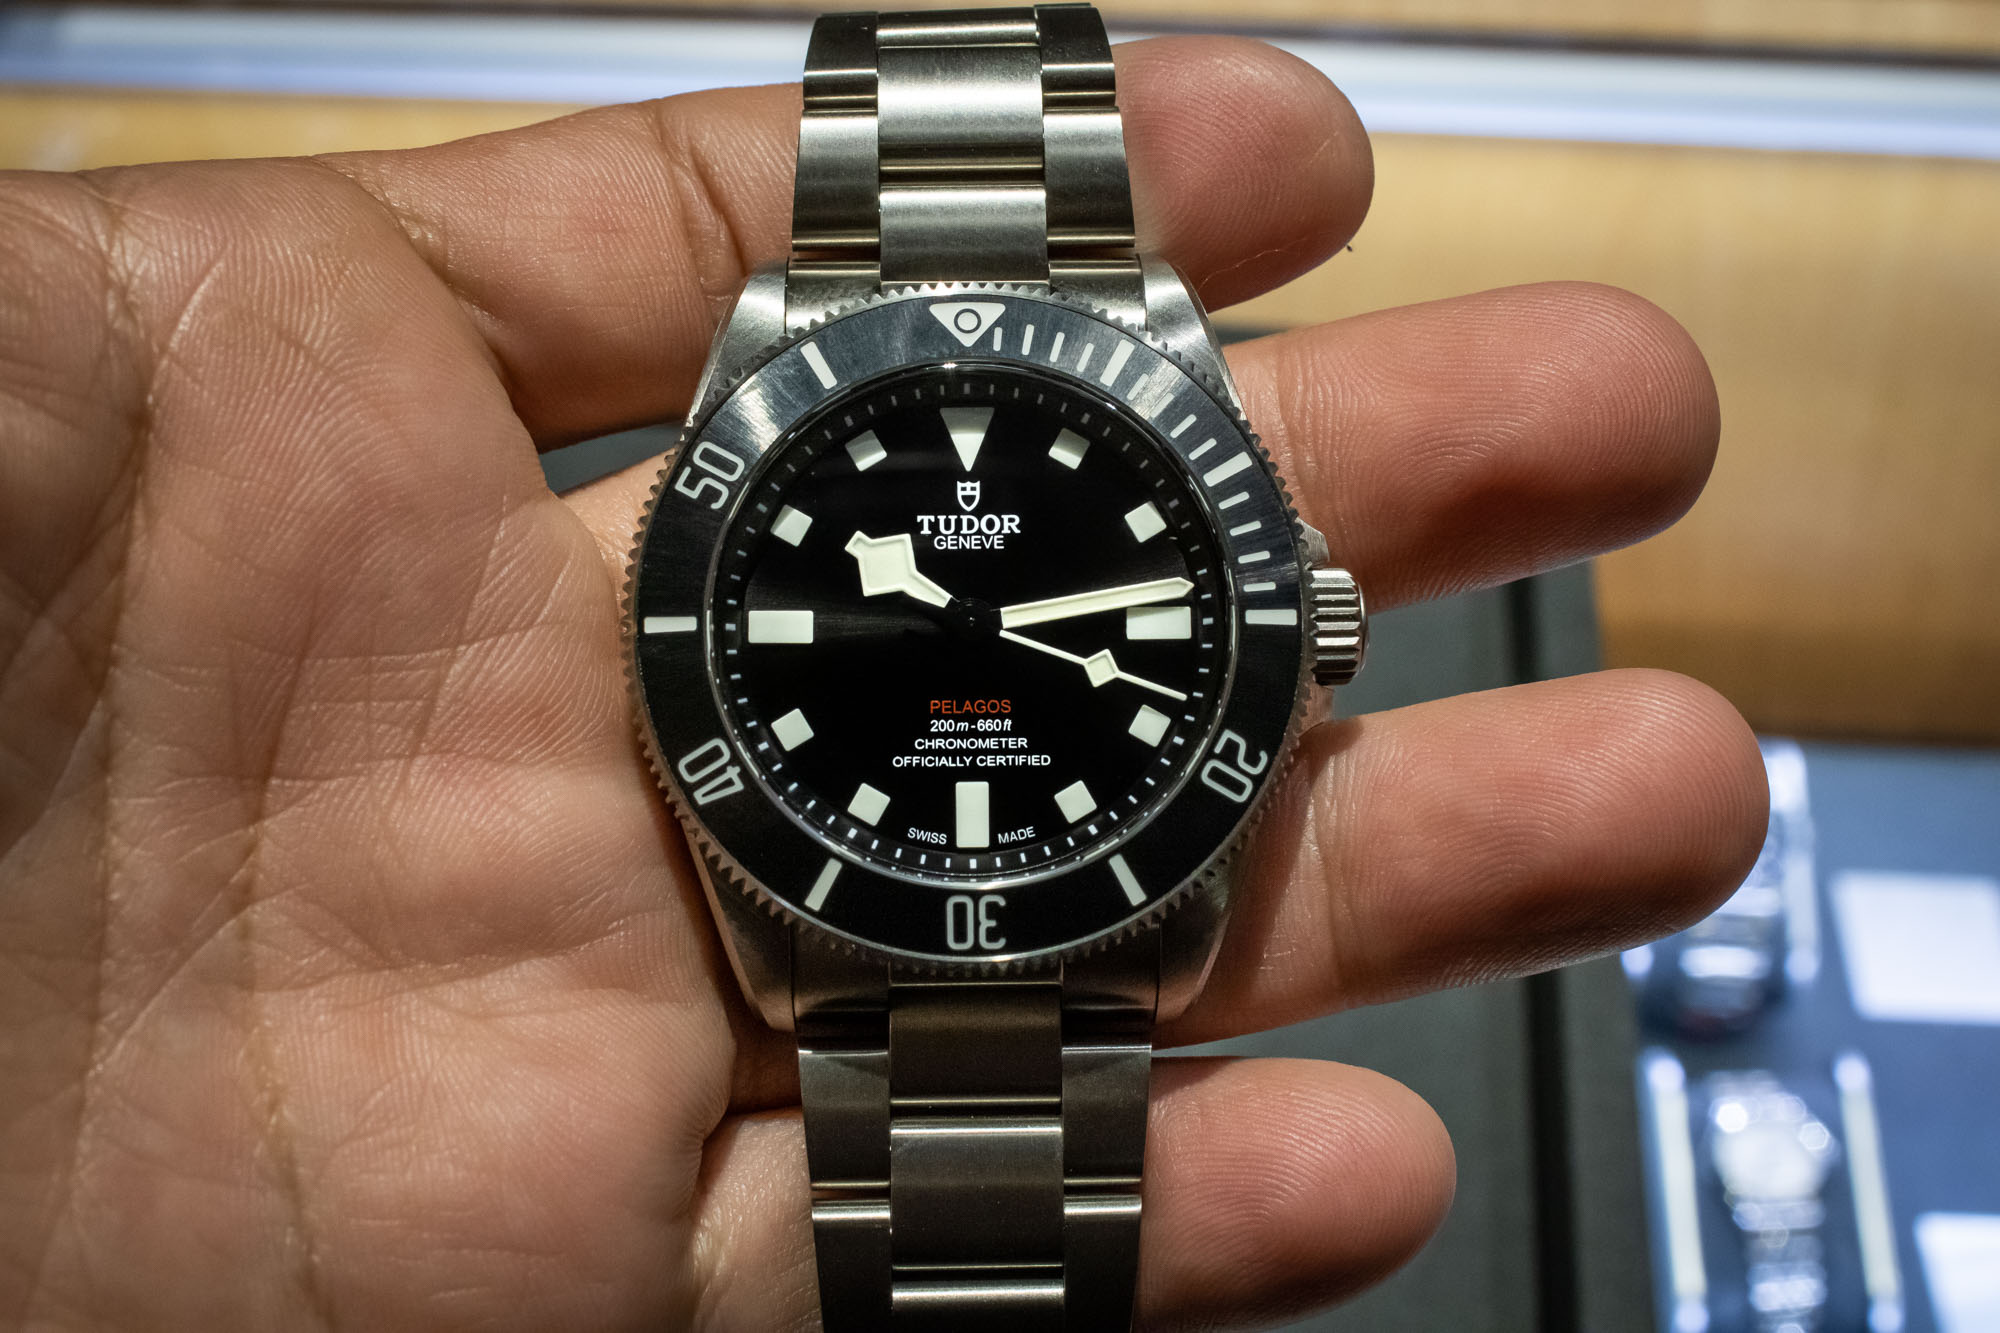 Opinion: What to think about the Tudor North Flag - Hands-on review with  specs & price - Monochrome-Watches